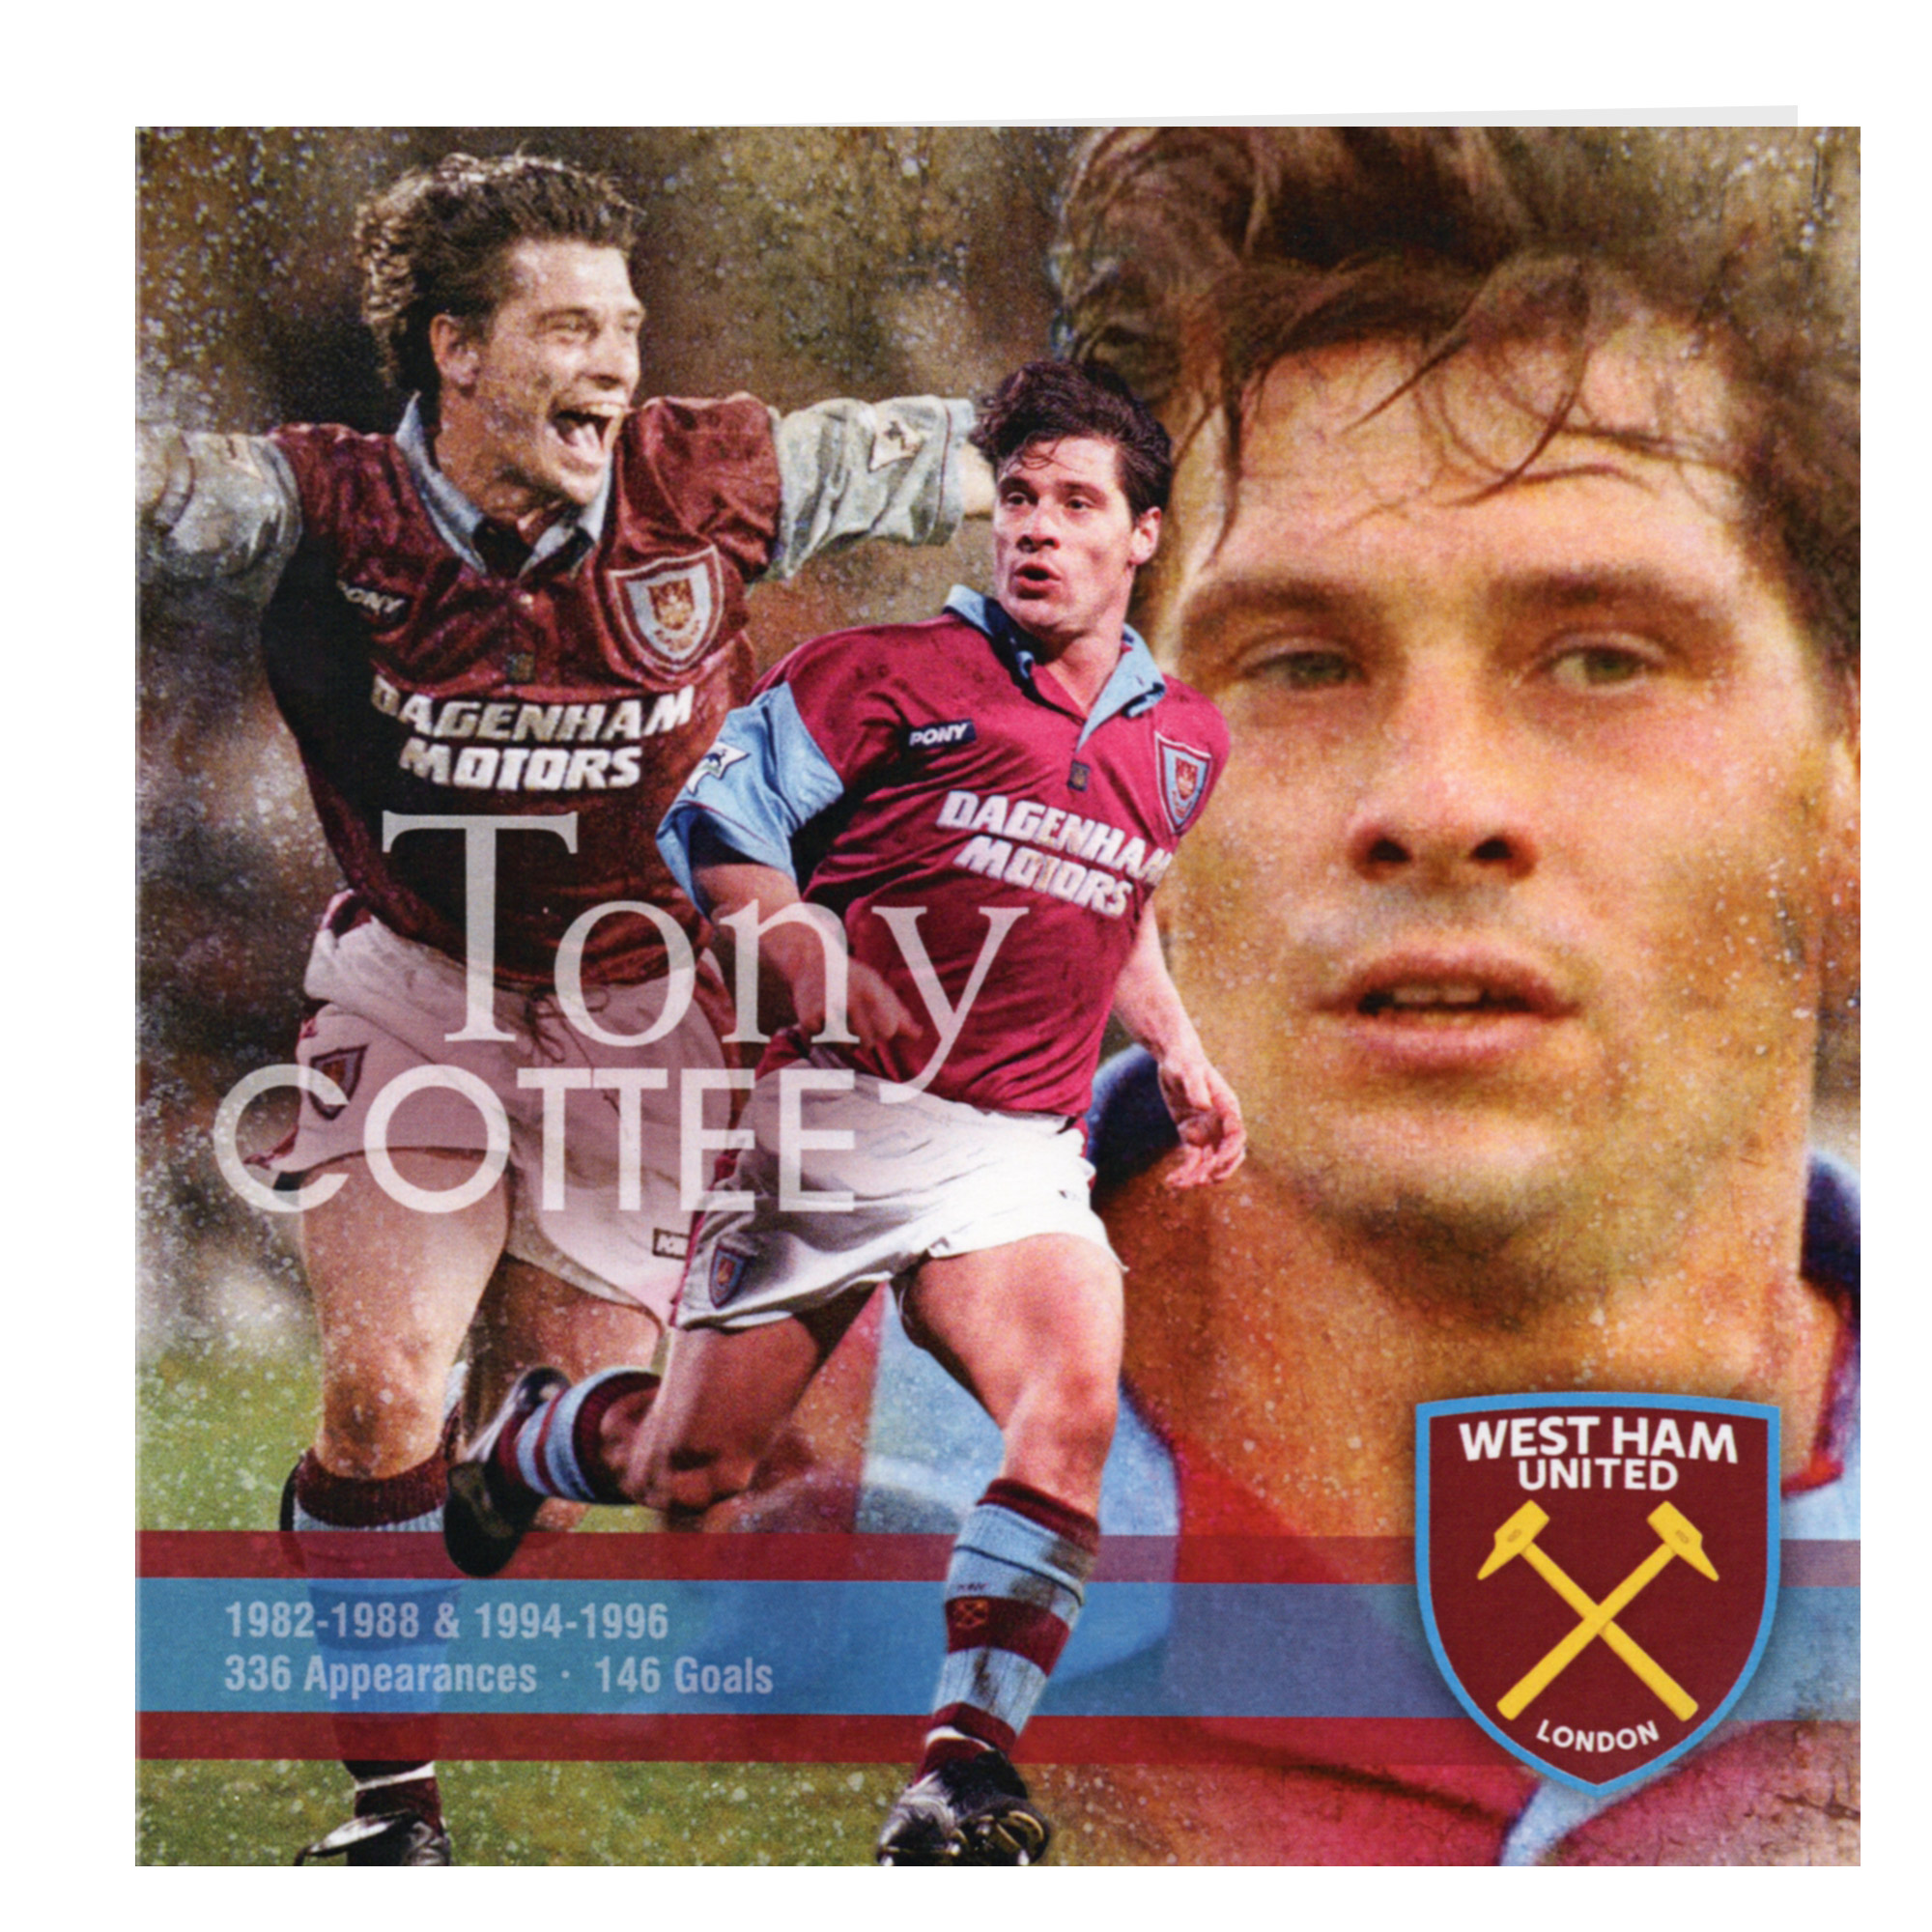 COTTEE MONTAGE CARD 